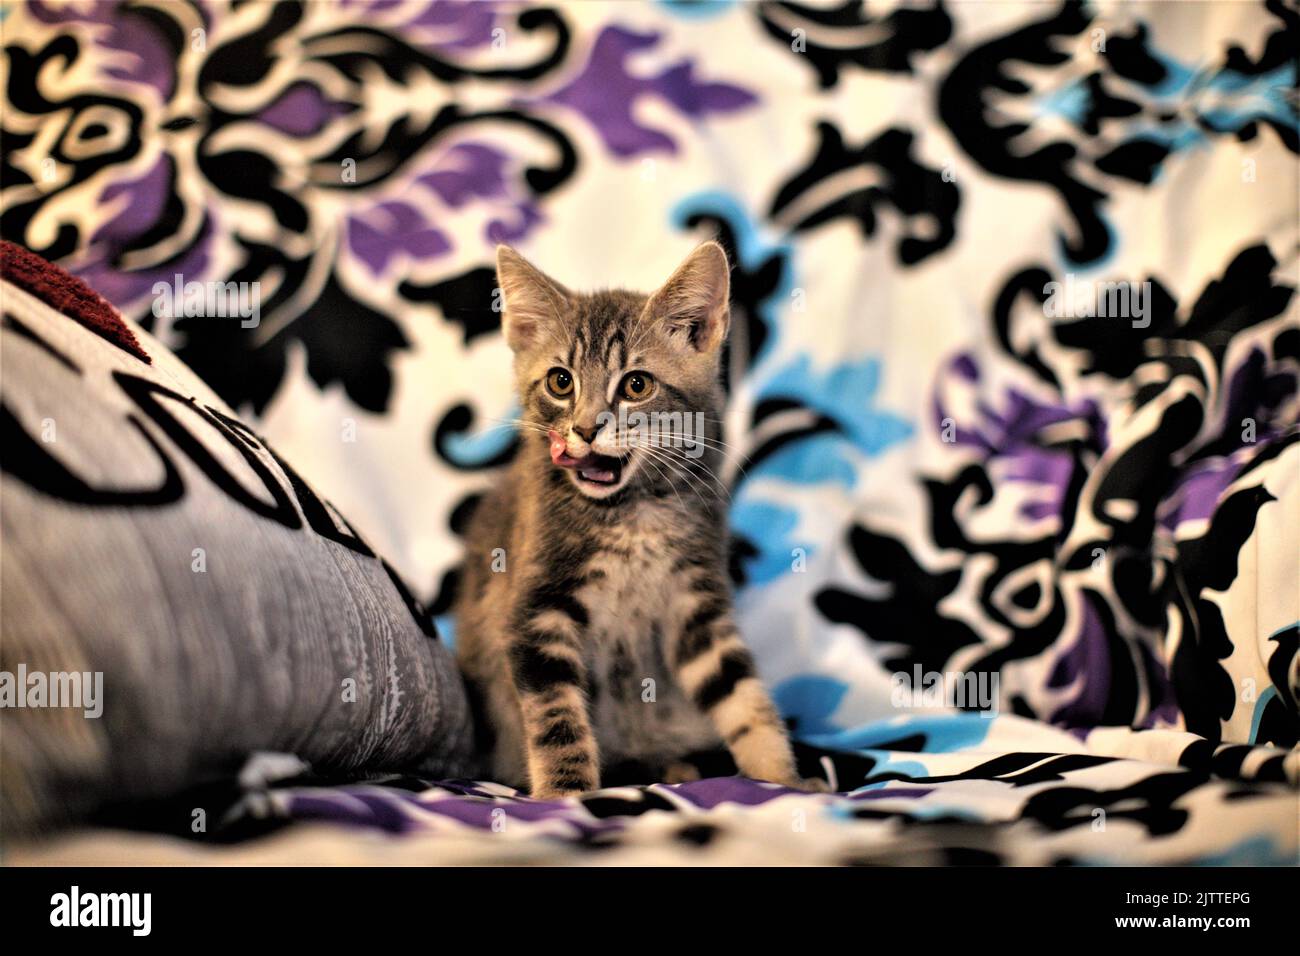 A close-up of a cute little kitten standing on patterned sofa and looking at camera Stock Photo